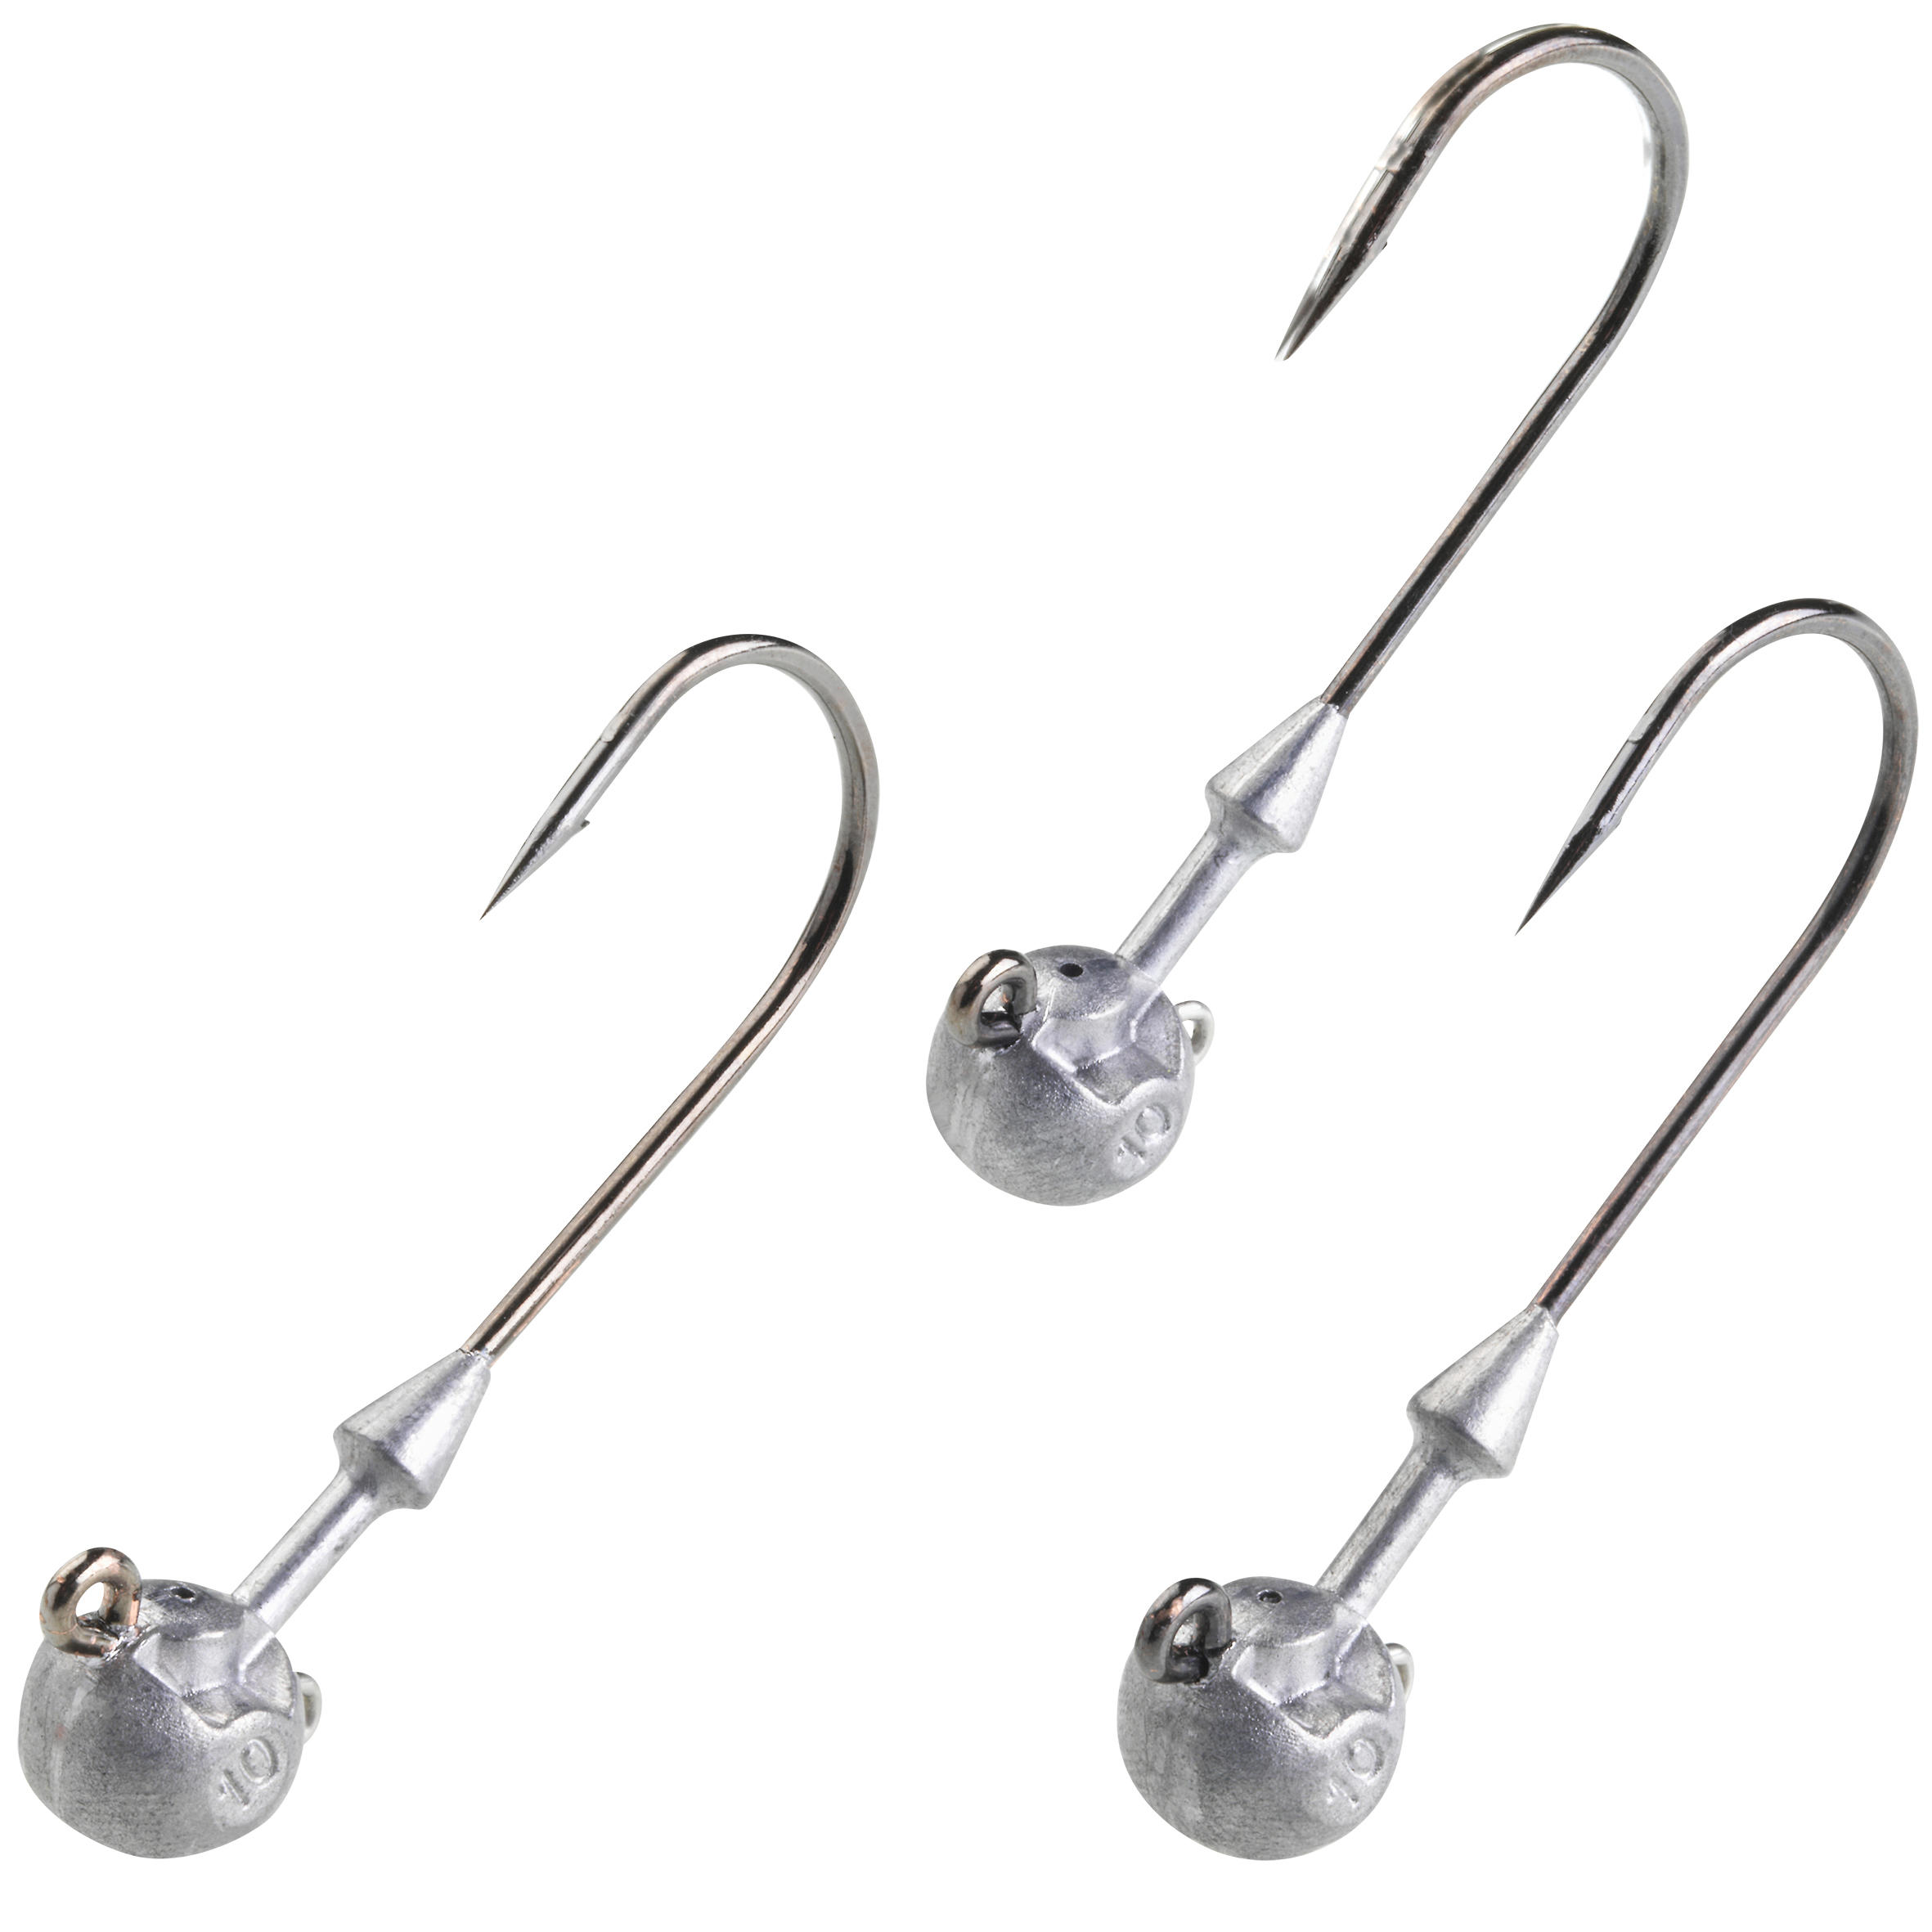 Jig Heads for Soft Lure Fishing 10 g - TP H 6/0